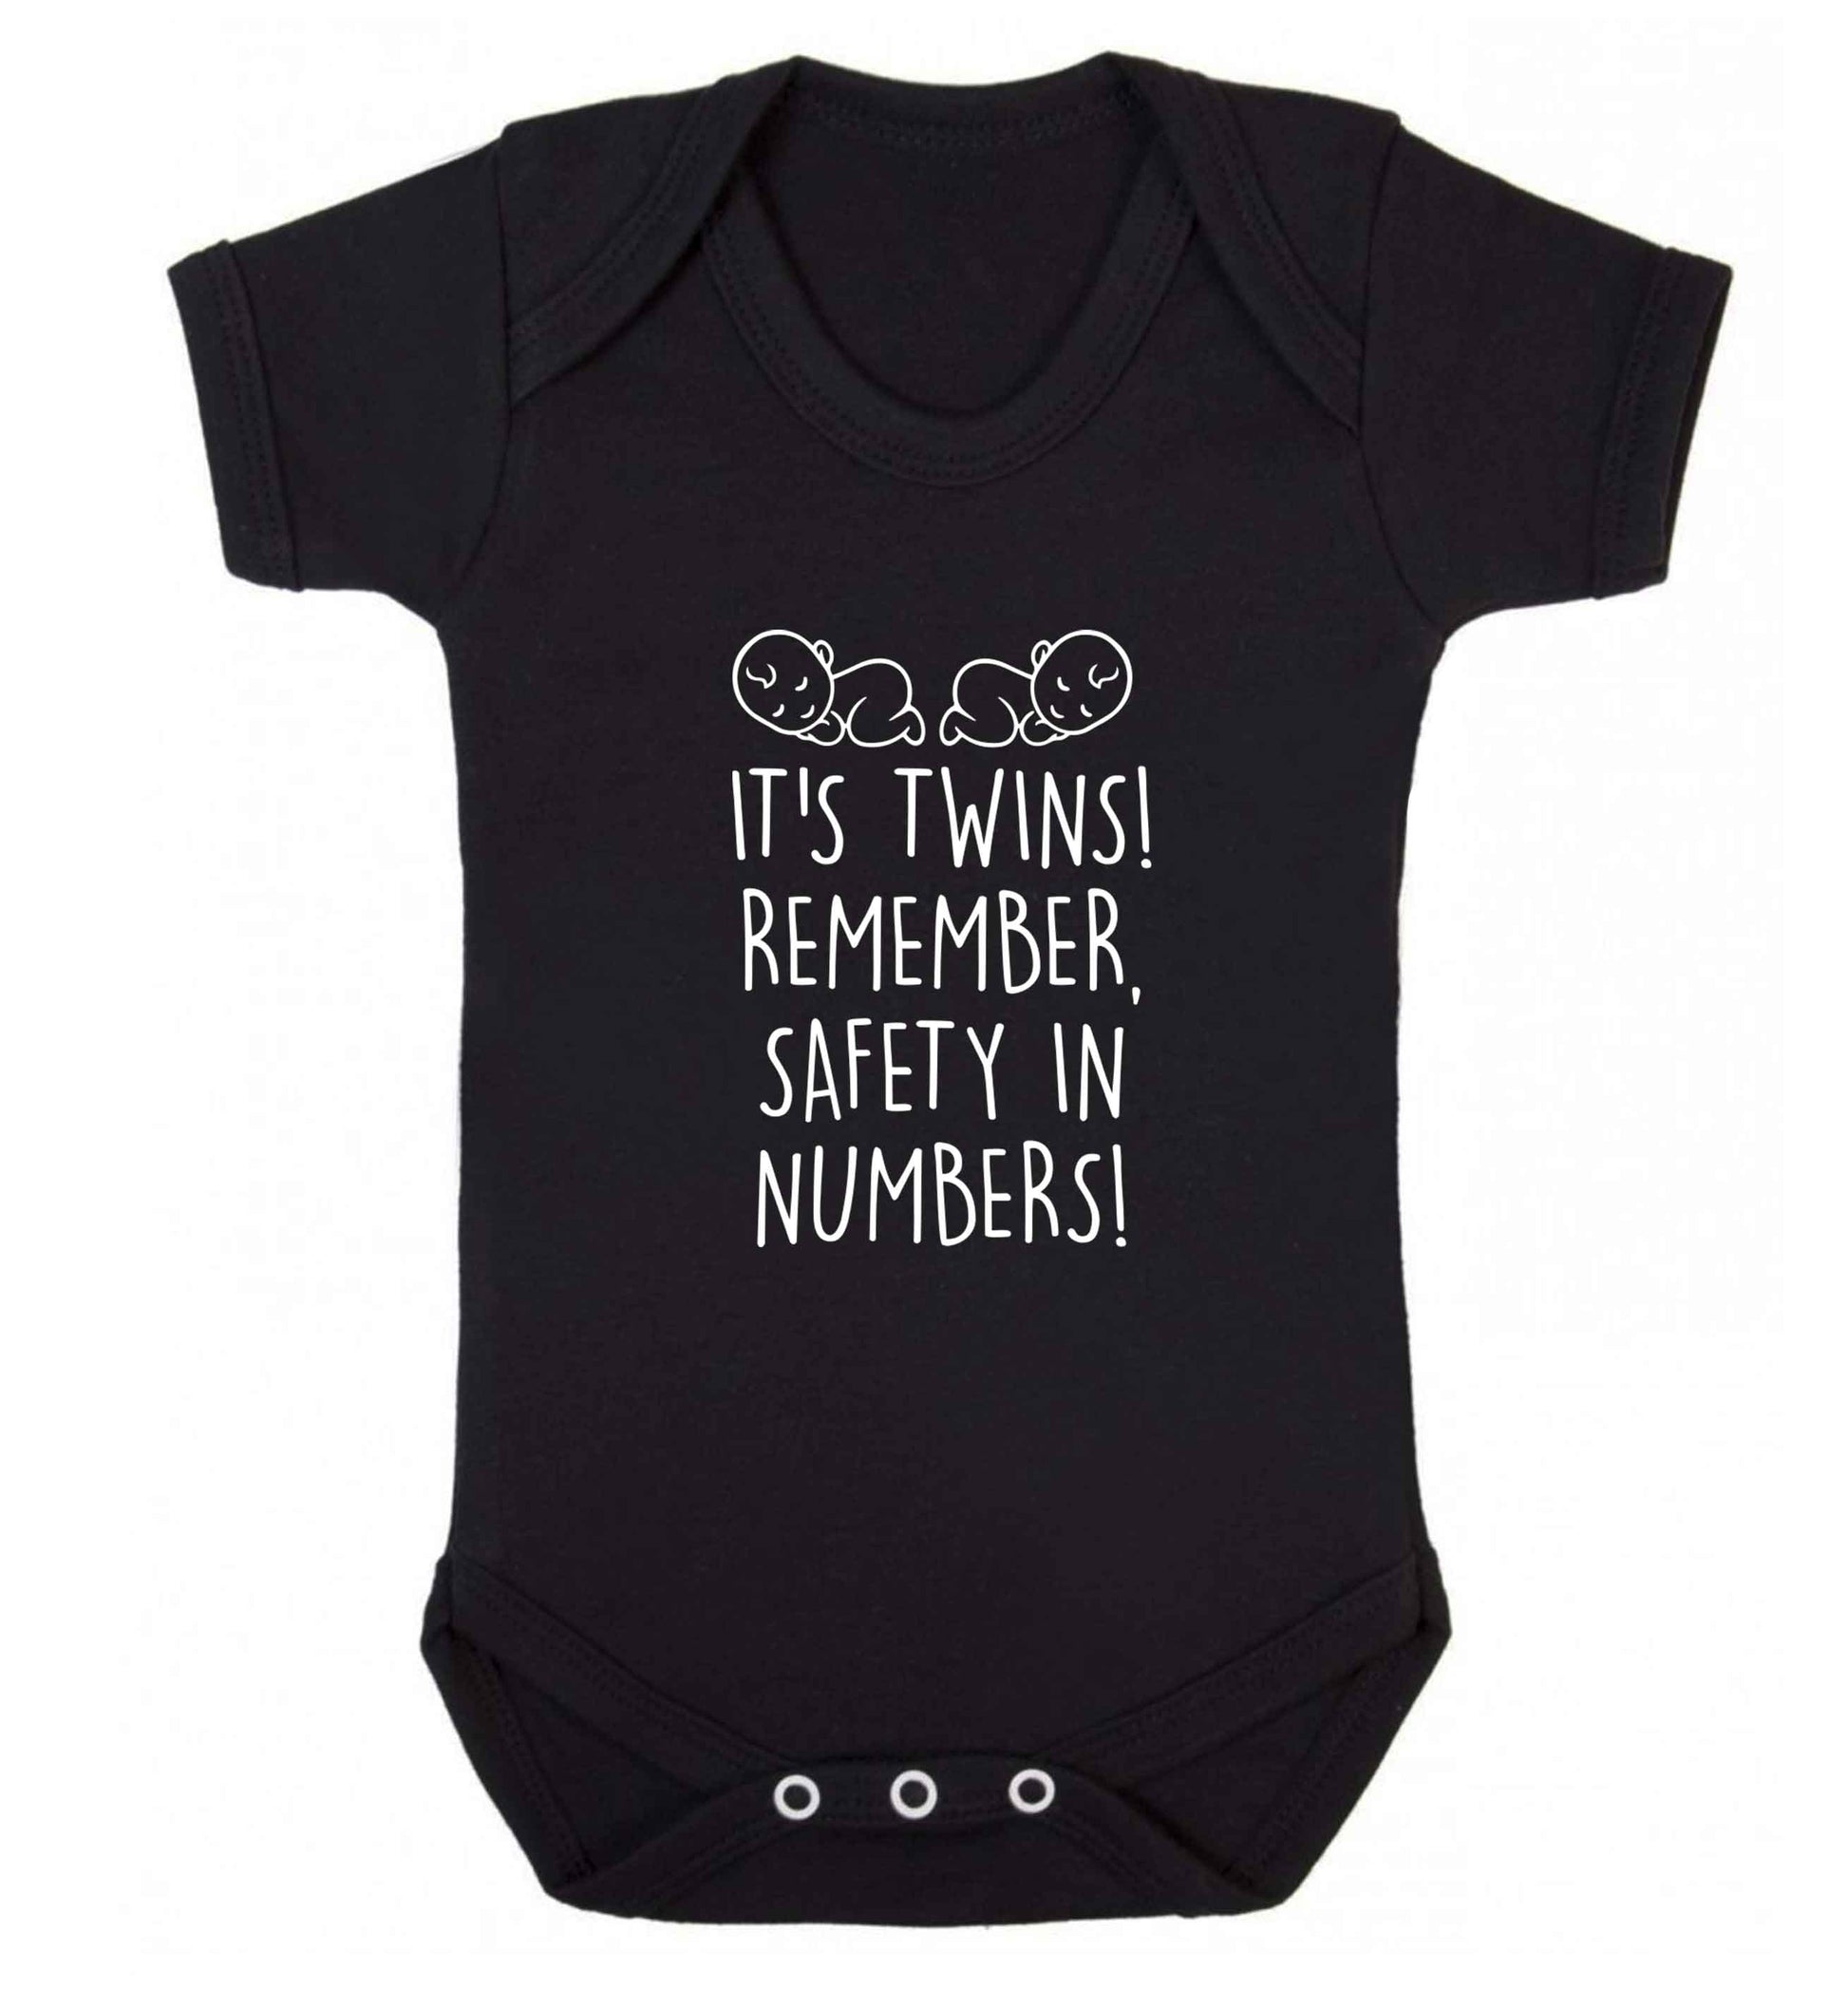 It's twins! Remember safety in numbers! baby vest black 18-24 months